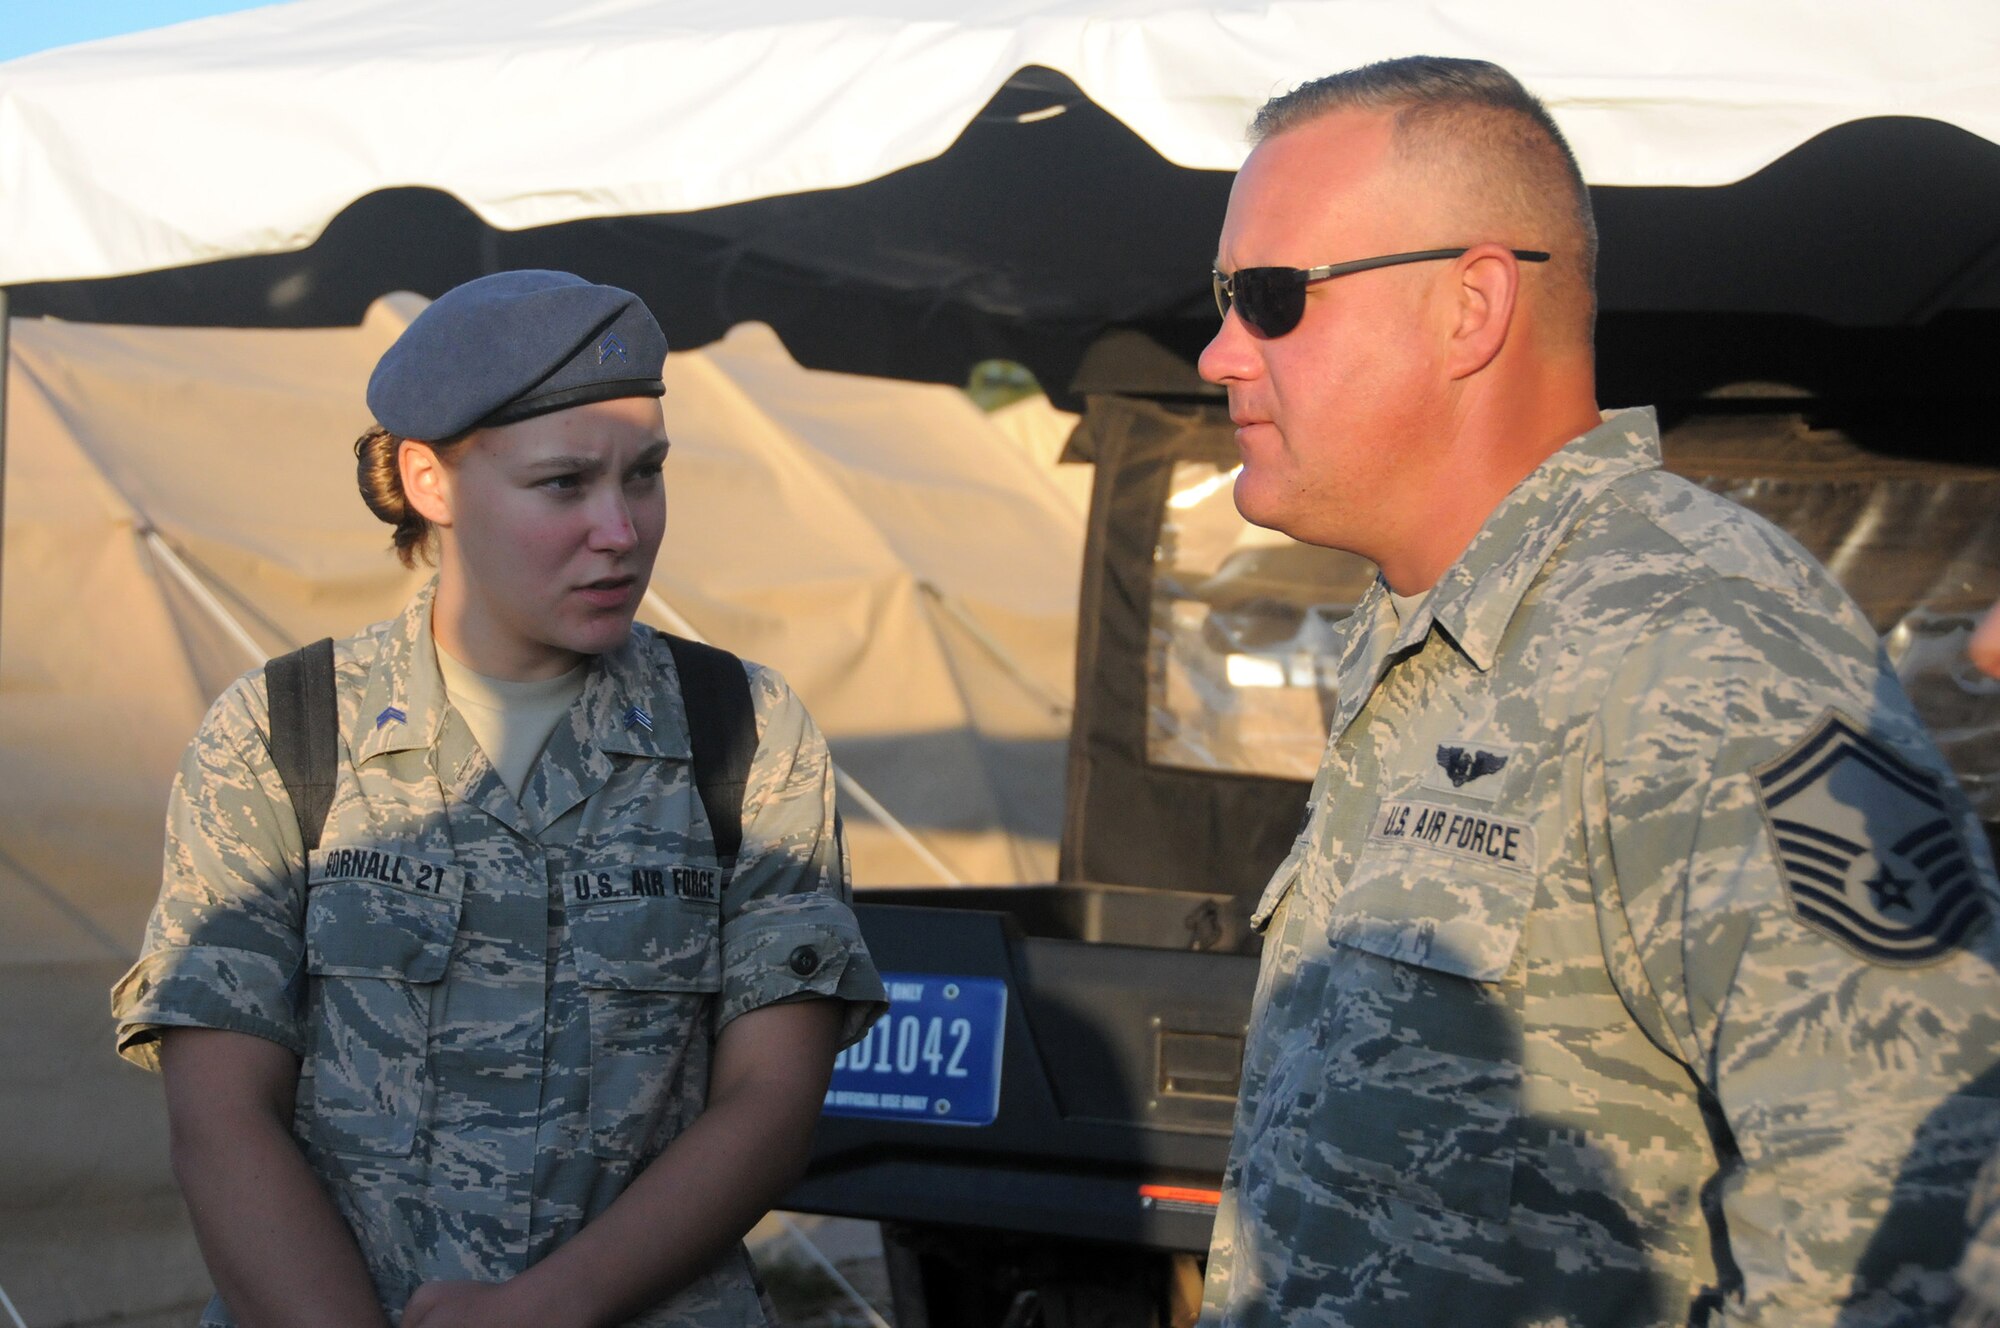 Cadet 3rd Class Kaura Gornall, U.S. Air Force Academy junior, interacts with her father, Senior Master Sgt. John Gornall, a medical technician with the 445th Aeromedical Staging Squadron, July 29, 2019 at the Academy.